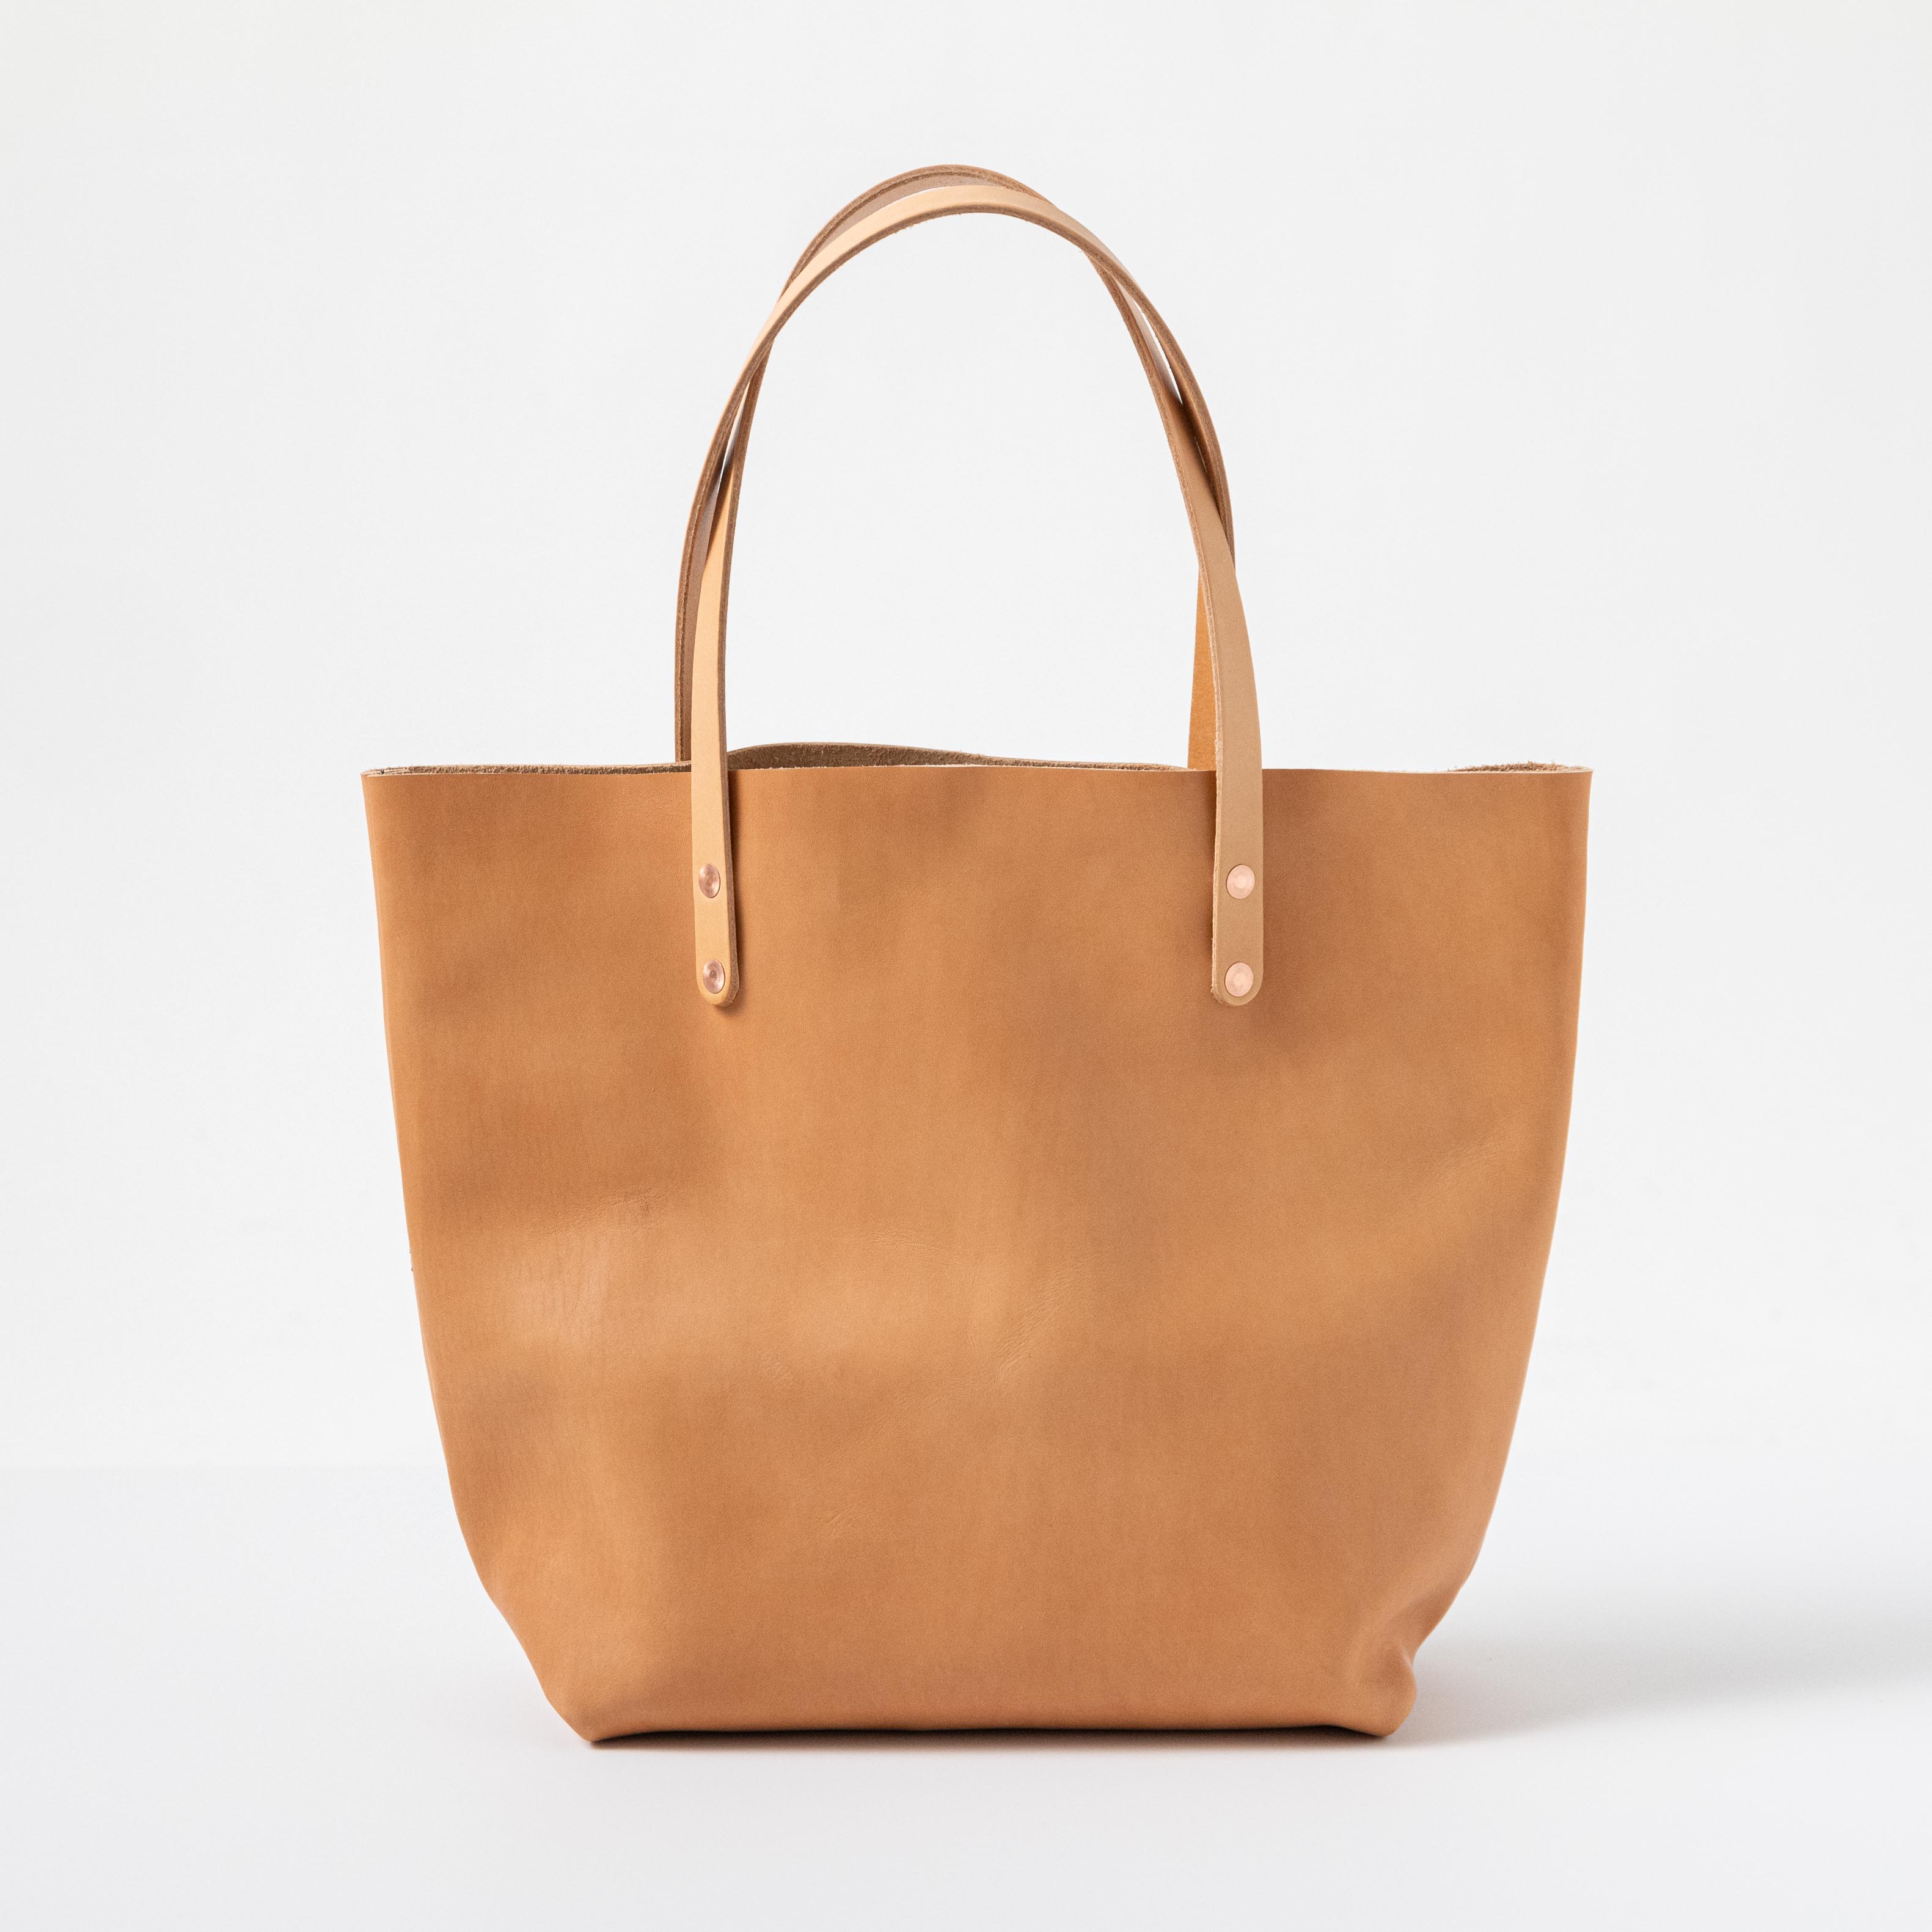 Natural Essex Tote handmade leather tote bag leather bags tote handmade leather bags at KMM Co